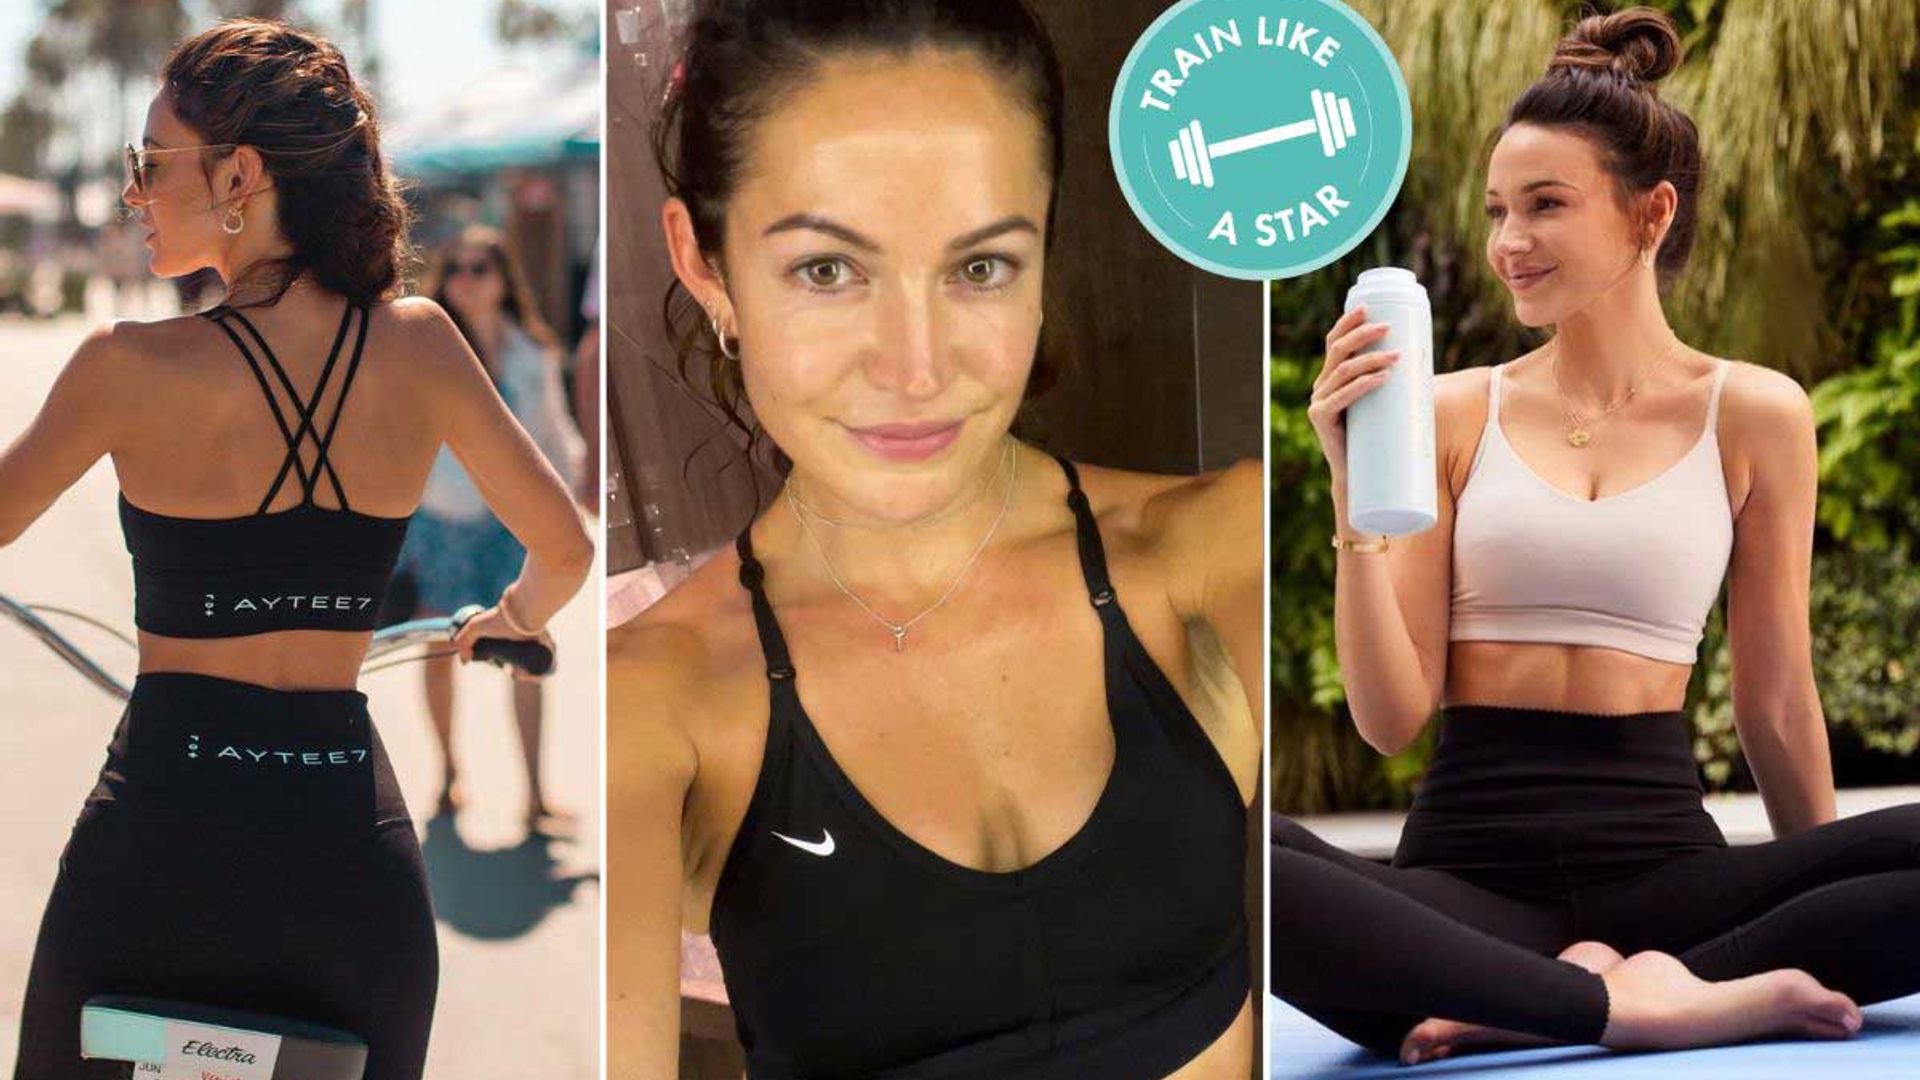 I tried Michelle Keegan's workout regime for 7 days and it was surprising